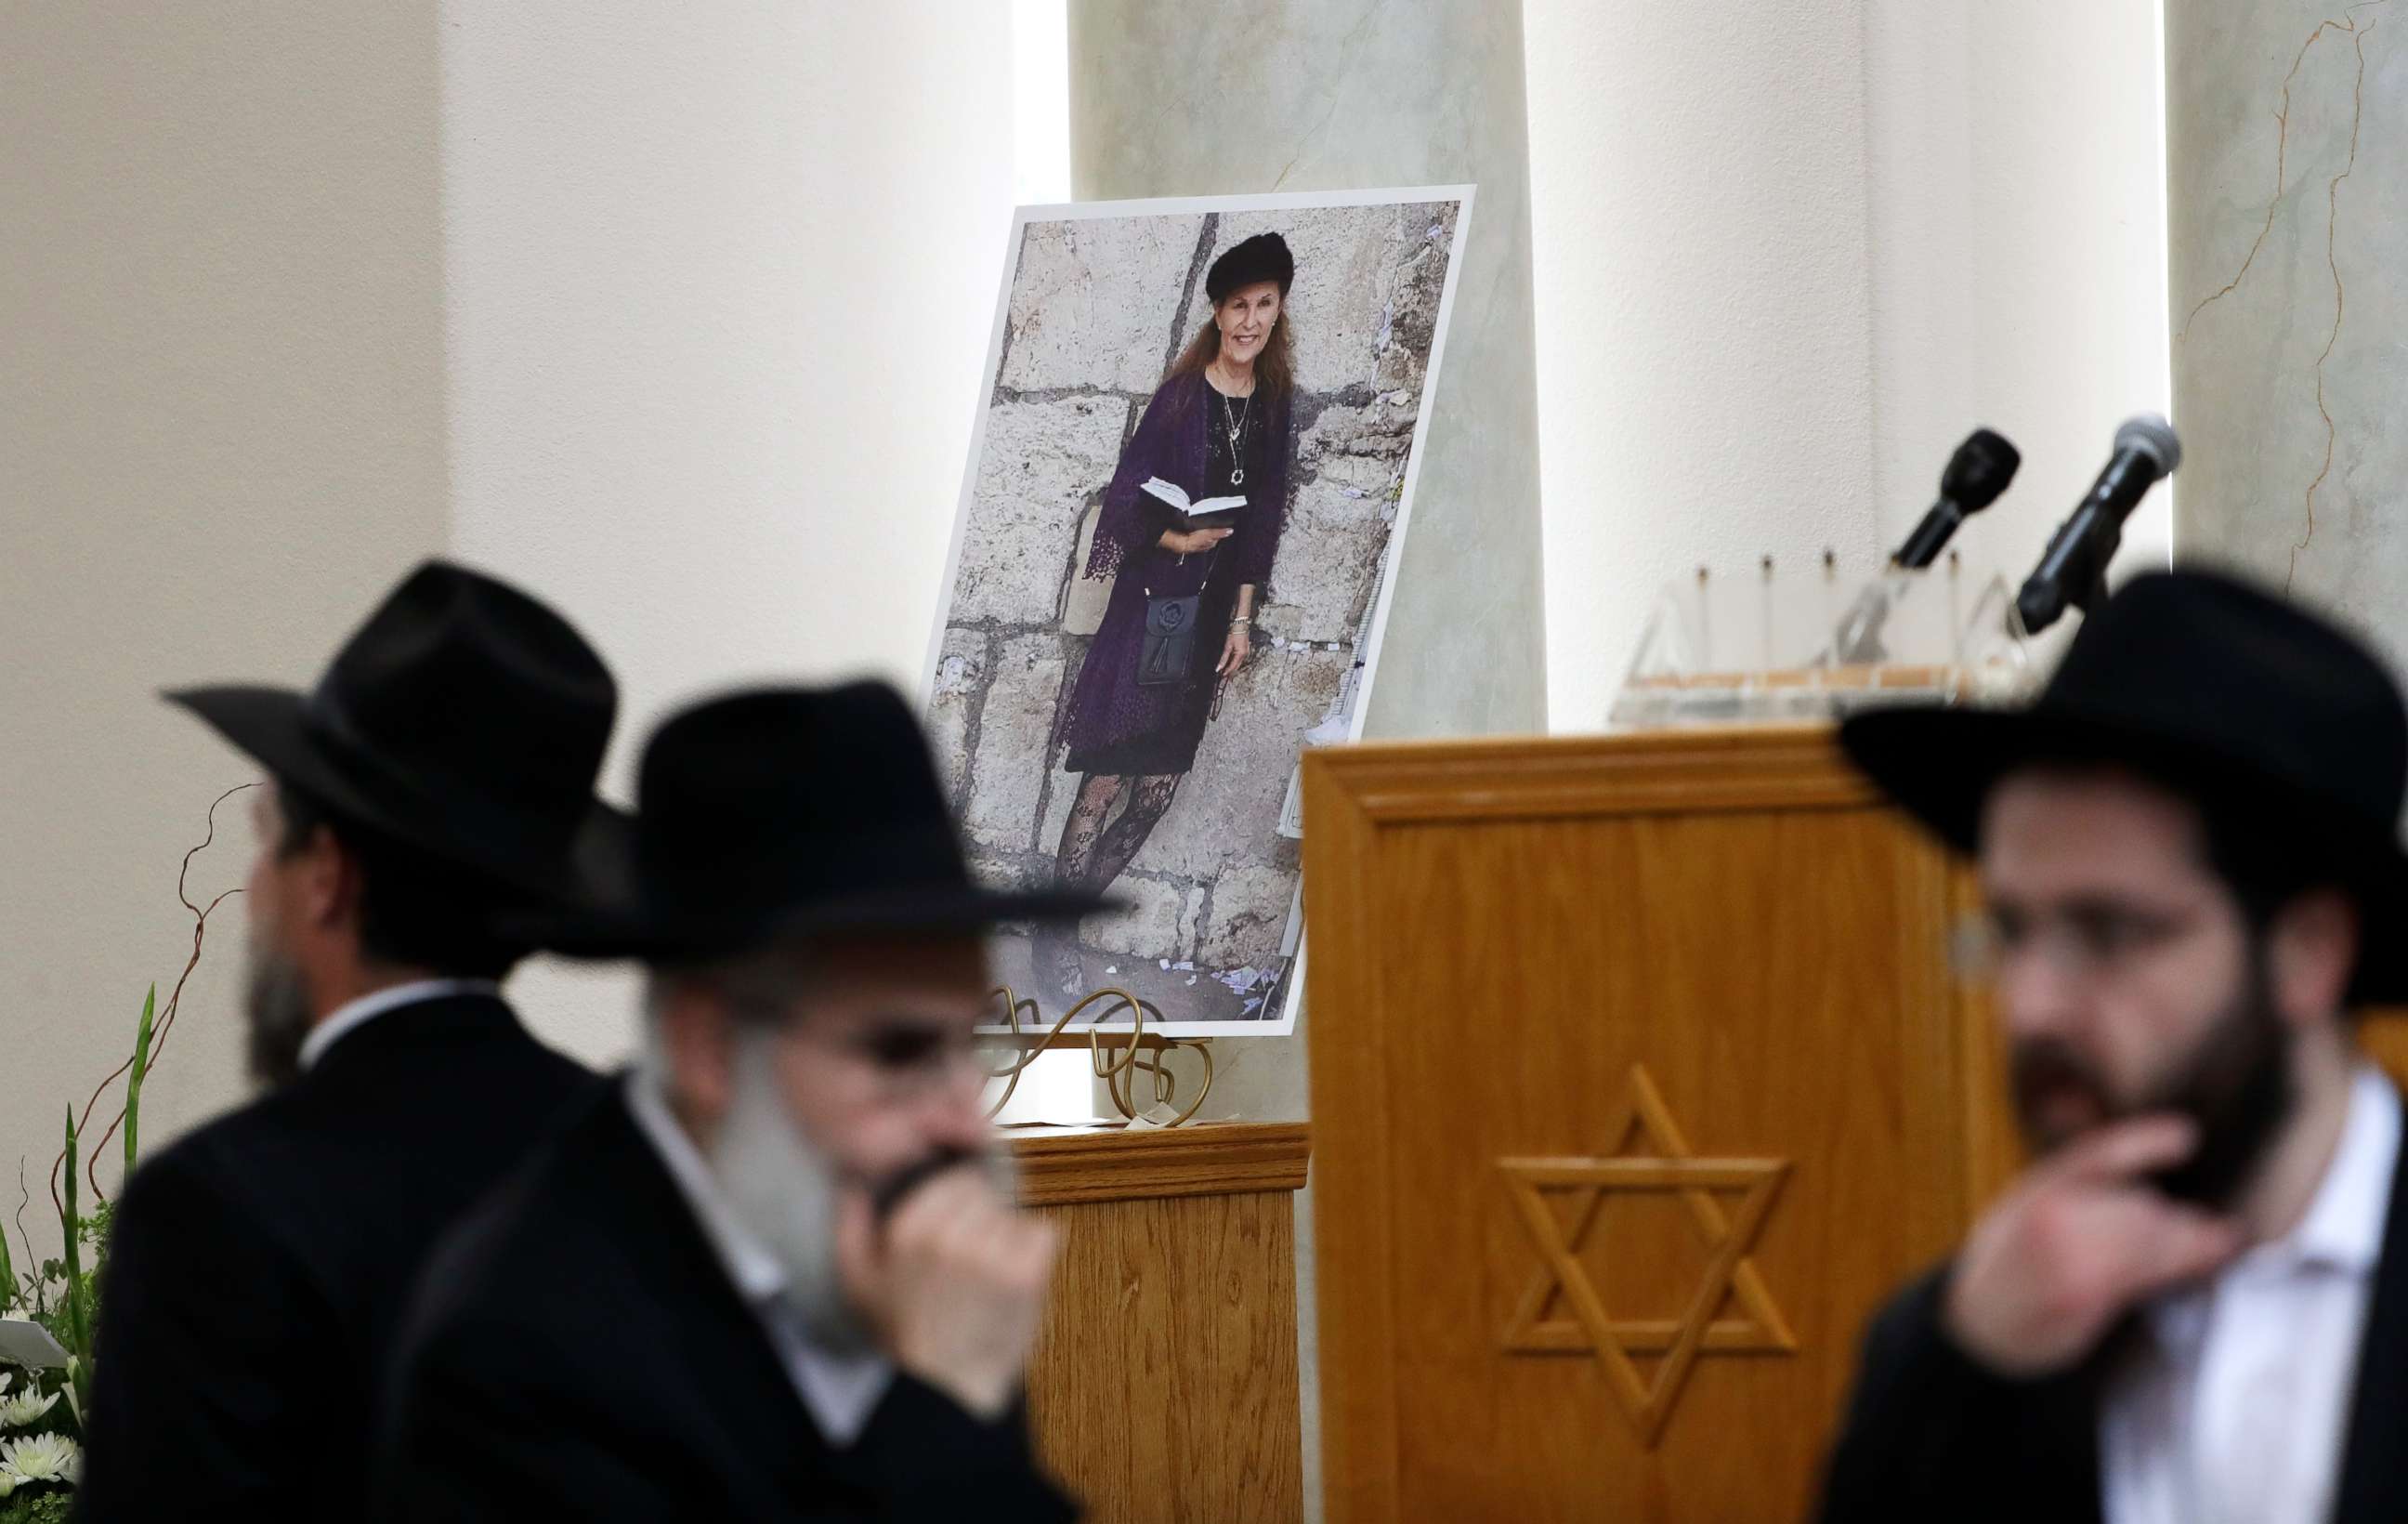 PHOTO: Attendees at the funeral for Lori Kaye, who was killed when a gunman opened fire inside the Chabad of Poway synagogue in Poway, Calif., pass by a photo of Kaye, April 29, 2019, inside the synagogue. 